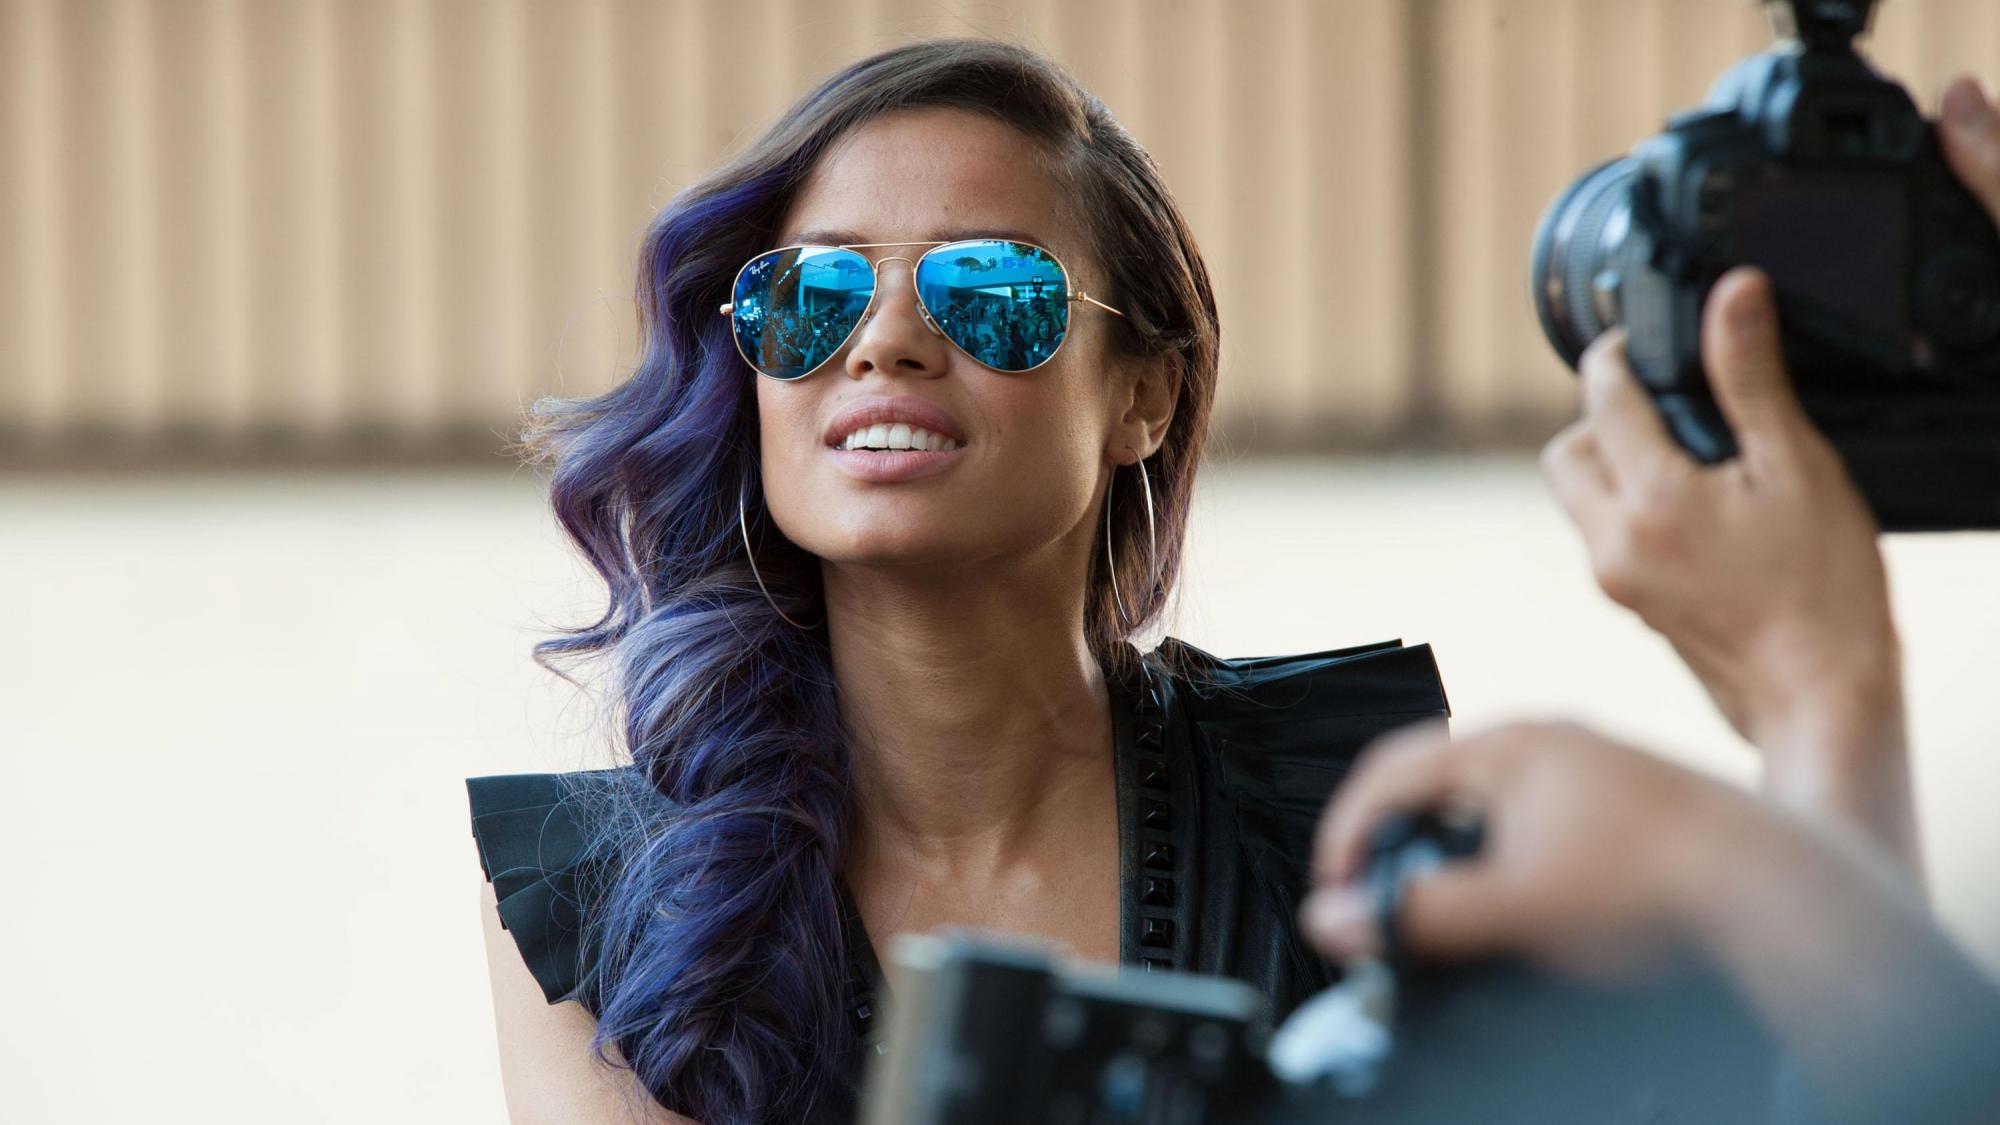 Backdrop Image for Beyond the Lights